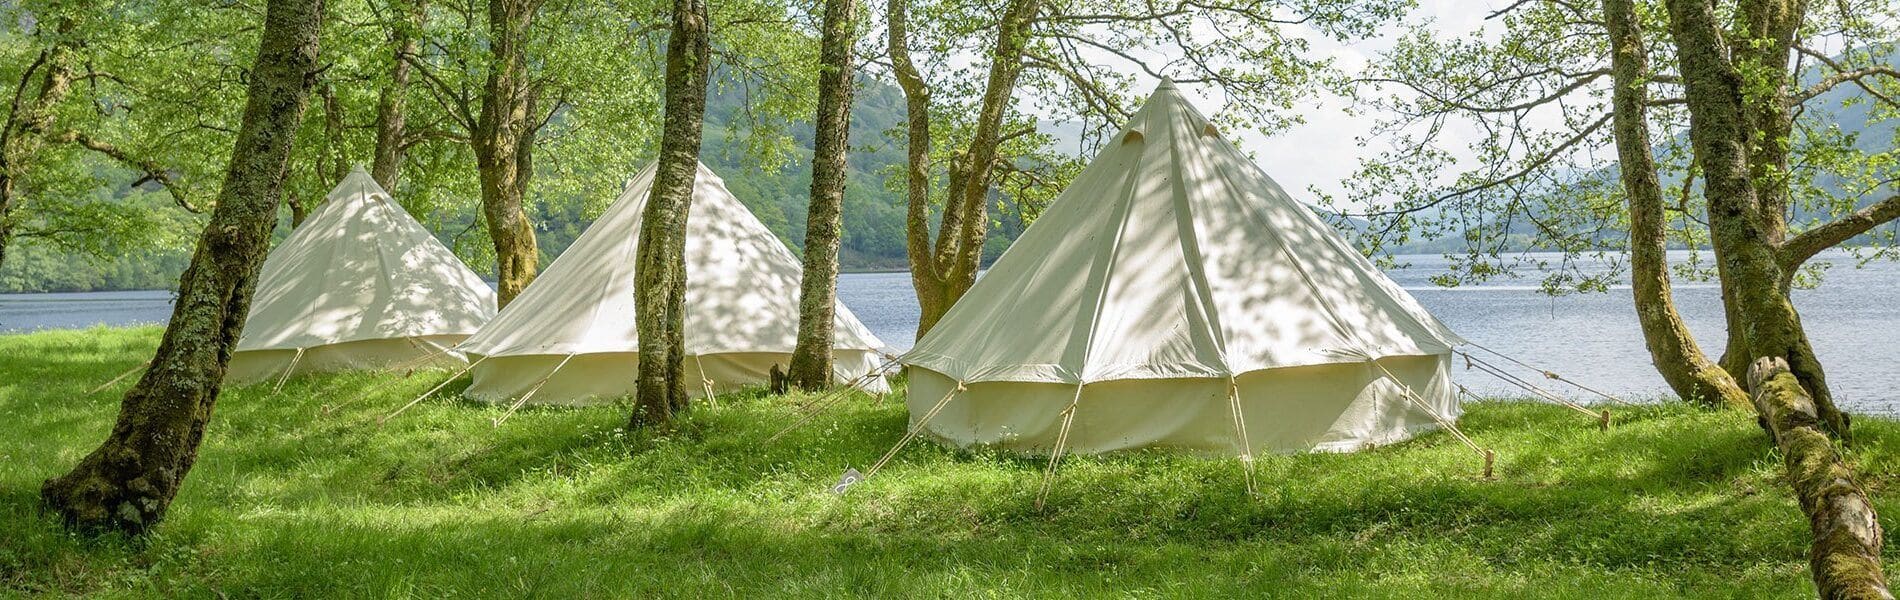 Bring some ‘glamping’ to your camping trip